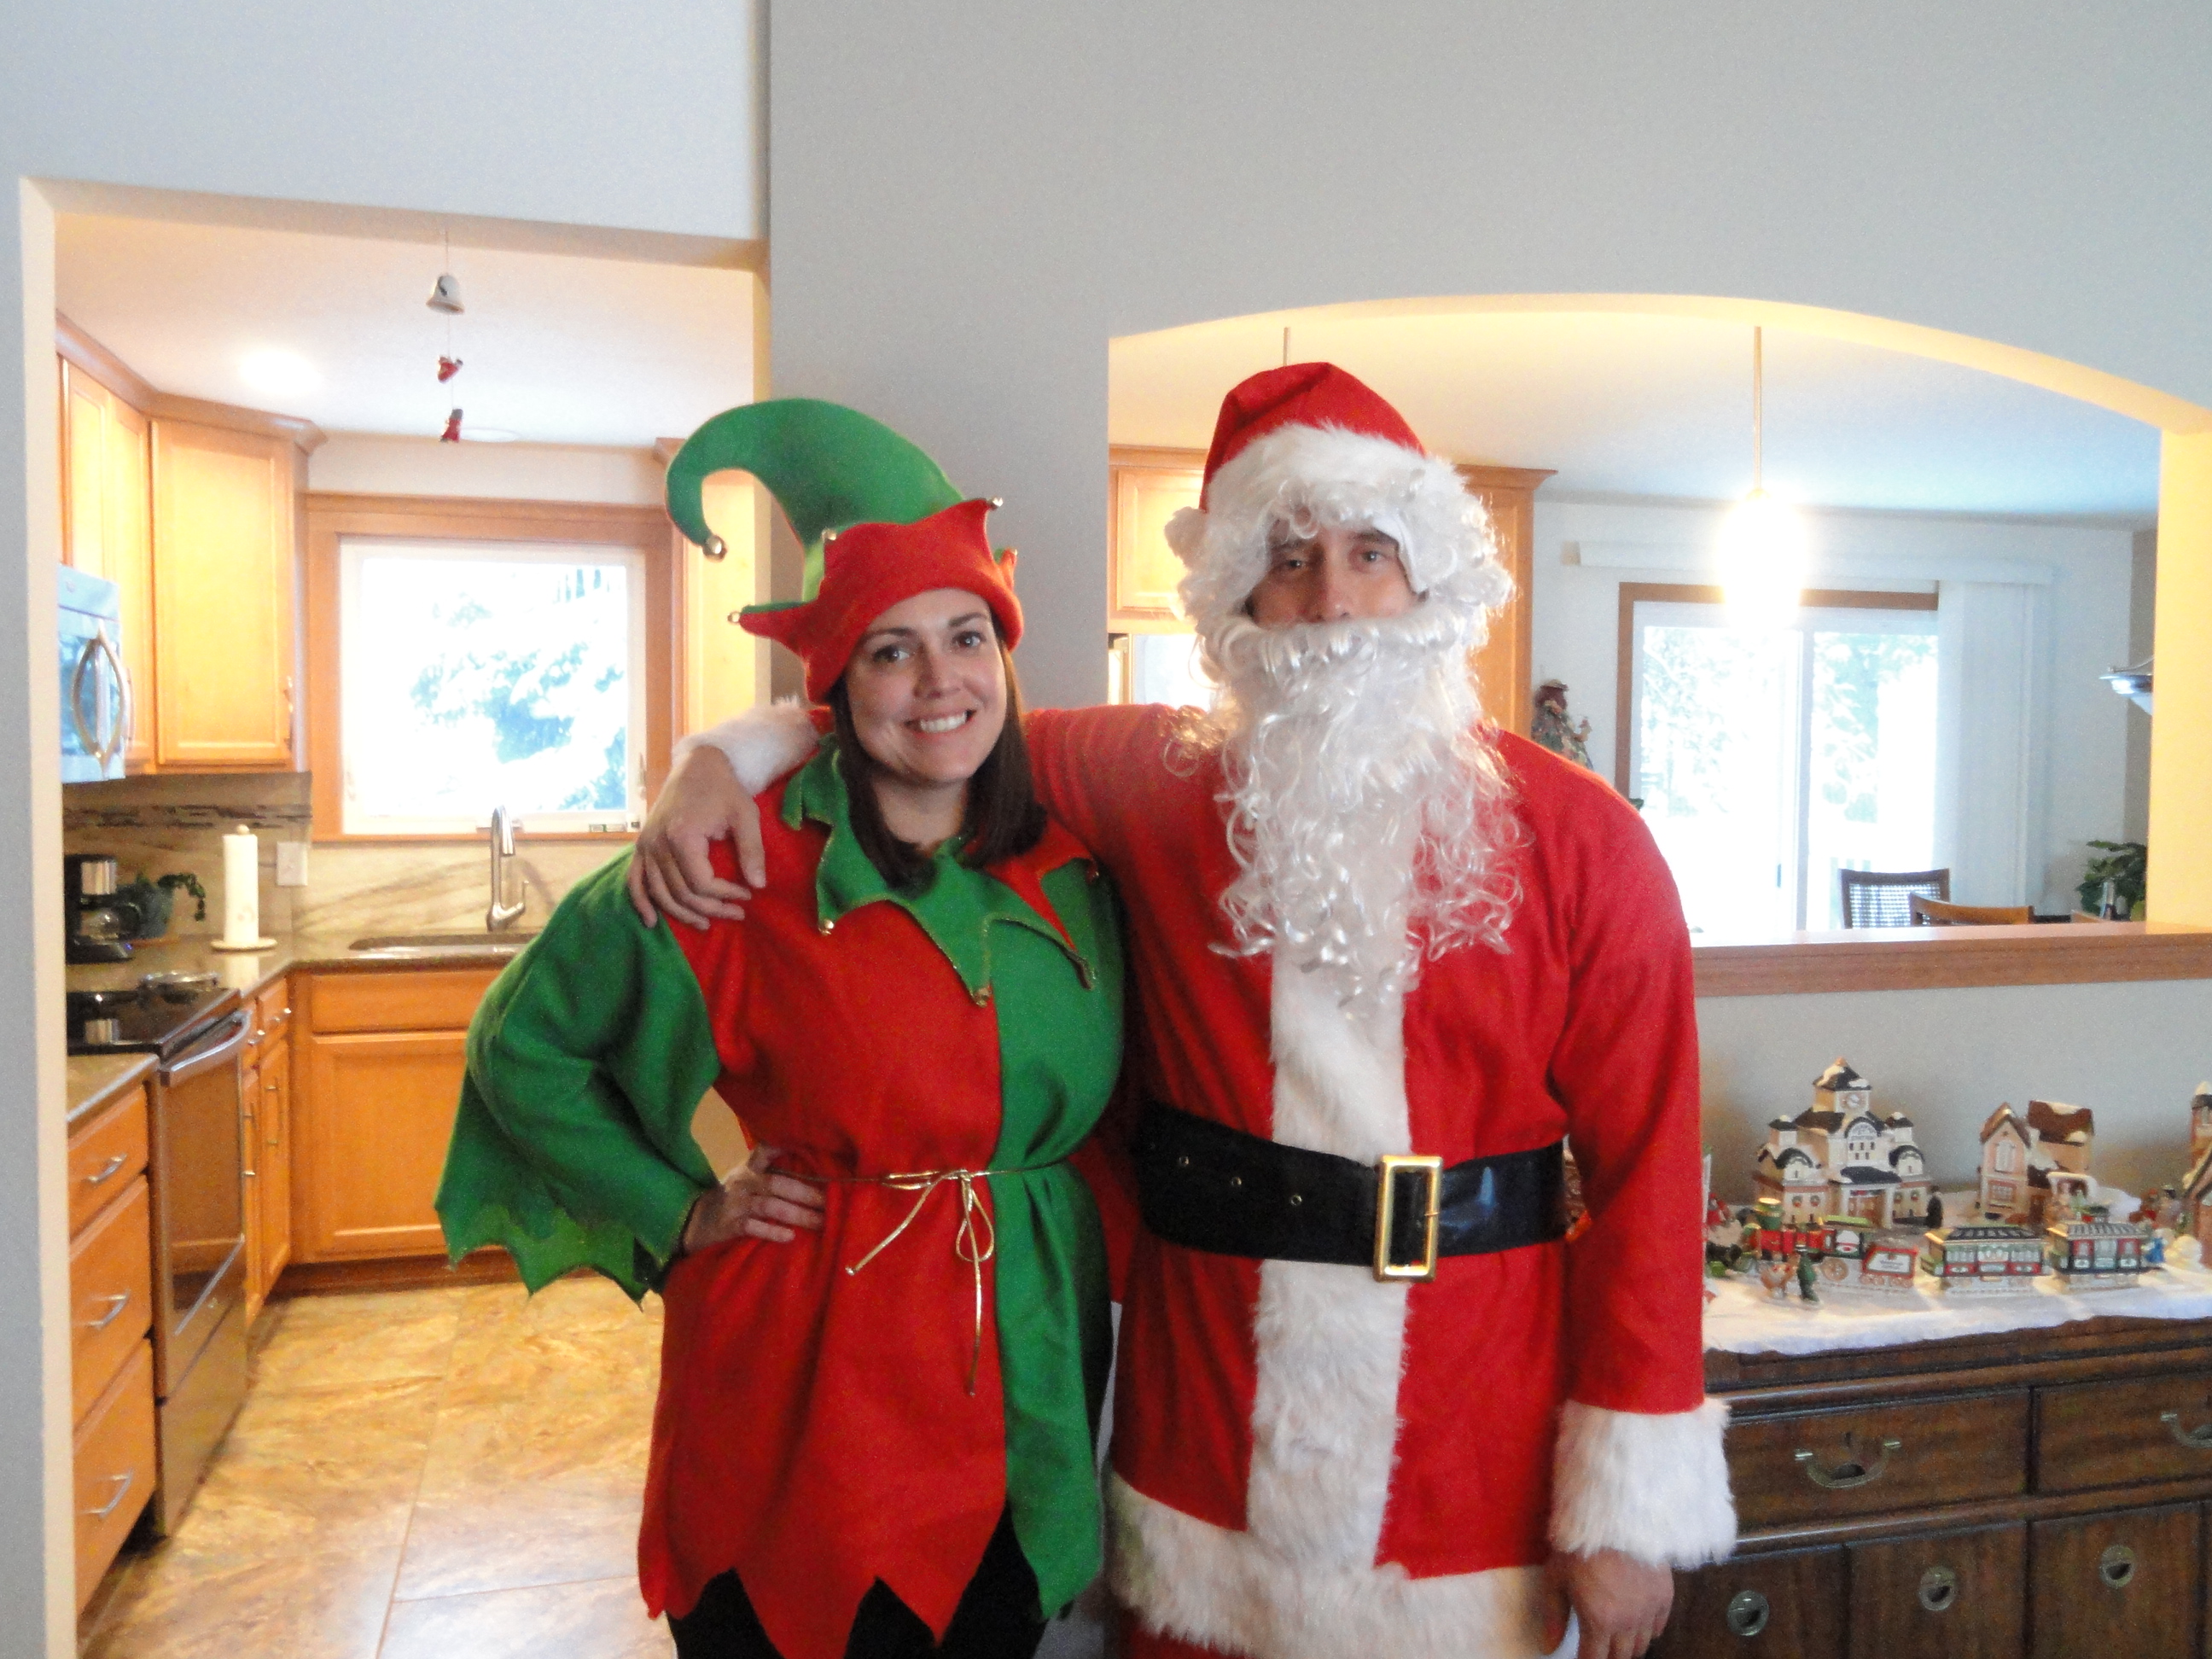 This is us before we left the North Pole and went to the Northeast Youth Center.